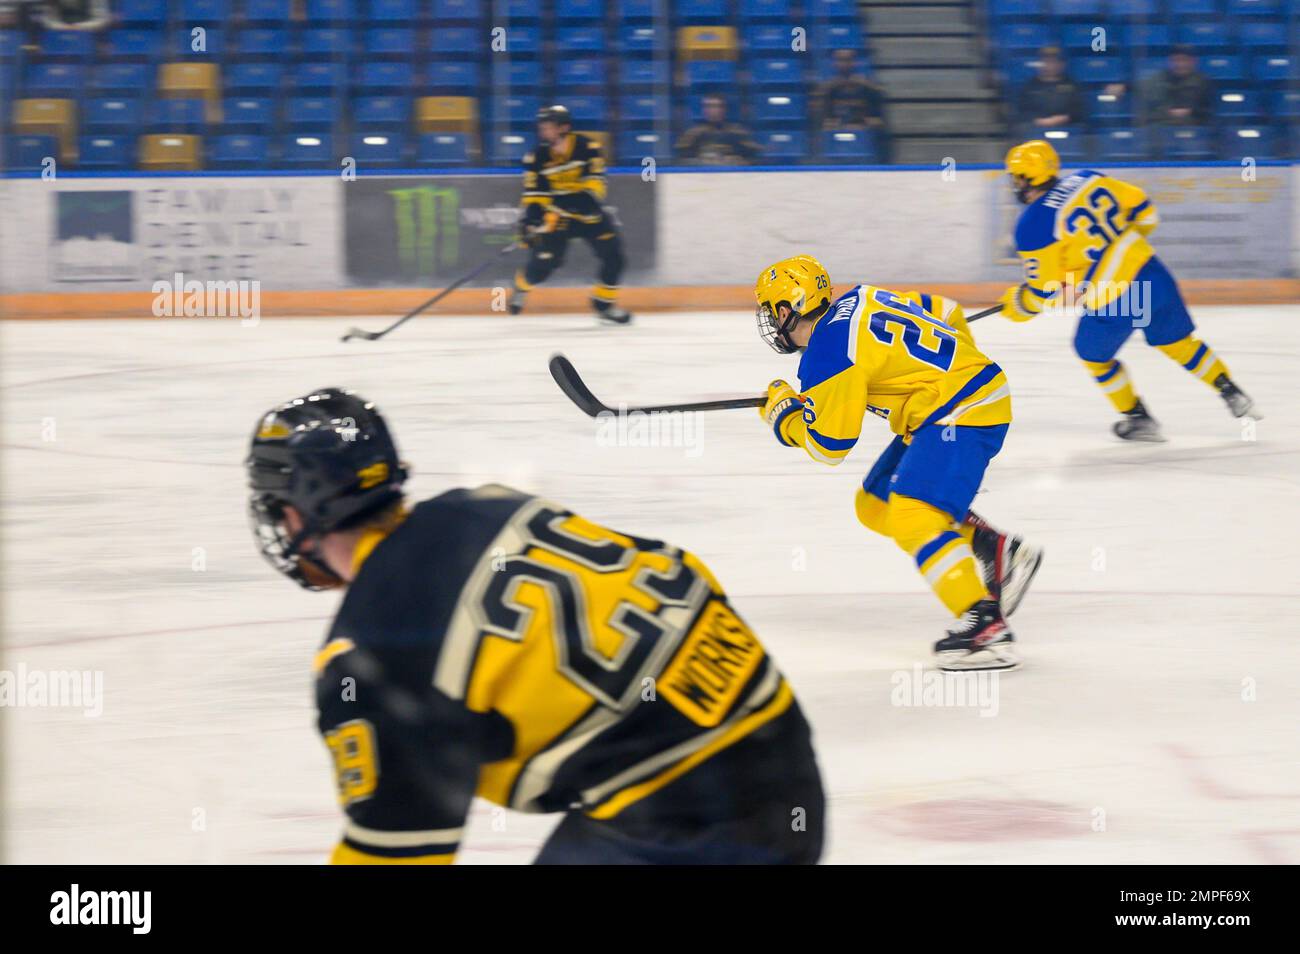 Members of the University of Alaska Fairbanks (UAF) and Michigan Technological University (MTU) hockey teams face off during a military appreciation game in Fairbanks, Alaska, Oct. 13, 2022. Also known as the ‘Nanooks’, the UAF’s hockey team played against the ‘Huskies’, MTU’s hockey team, at Carlson Center. Stock Photo